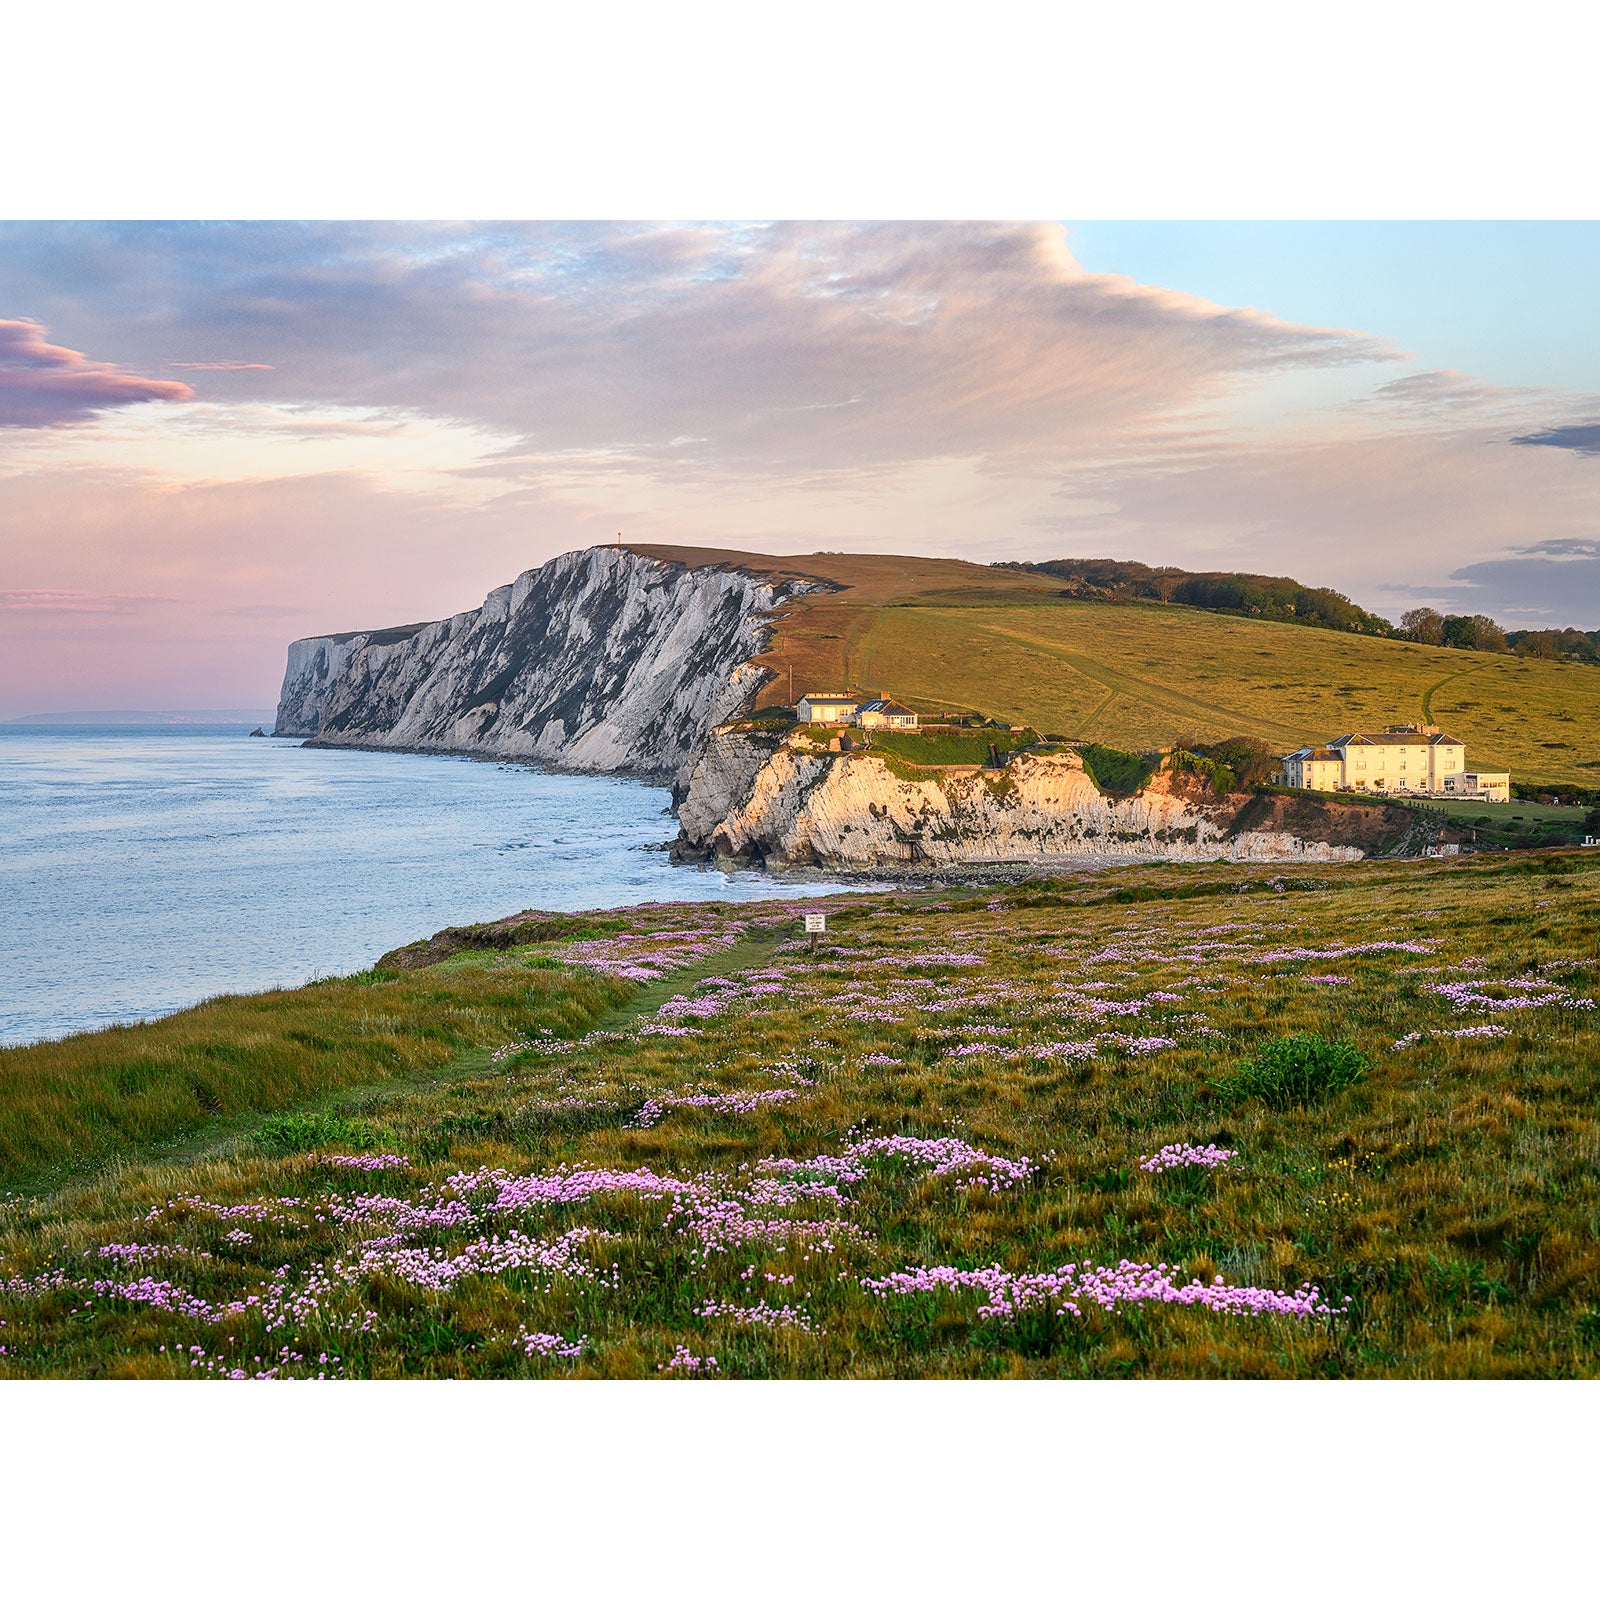 A scenic view of Pink Thrift by Freshwater Bay with a flowering meadow in the foreground and buildings near the coastline at dusk on the Isle of Wight, captured by Available Light Photography.